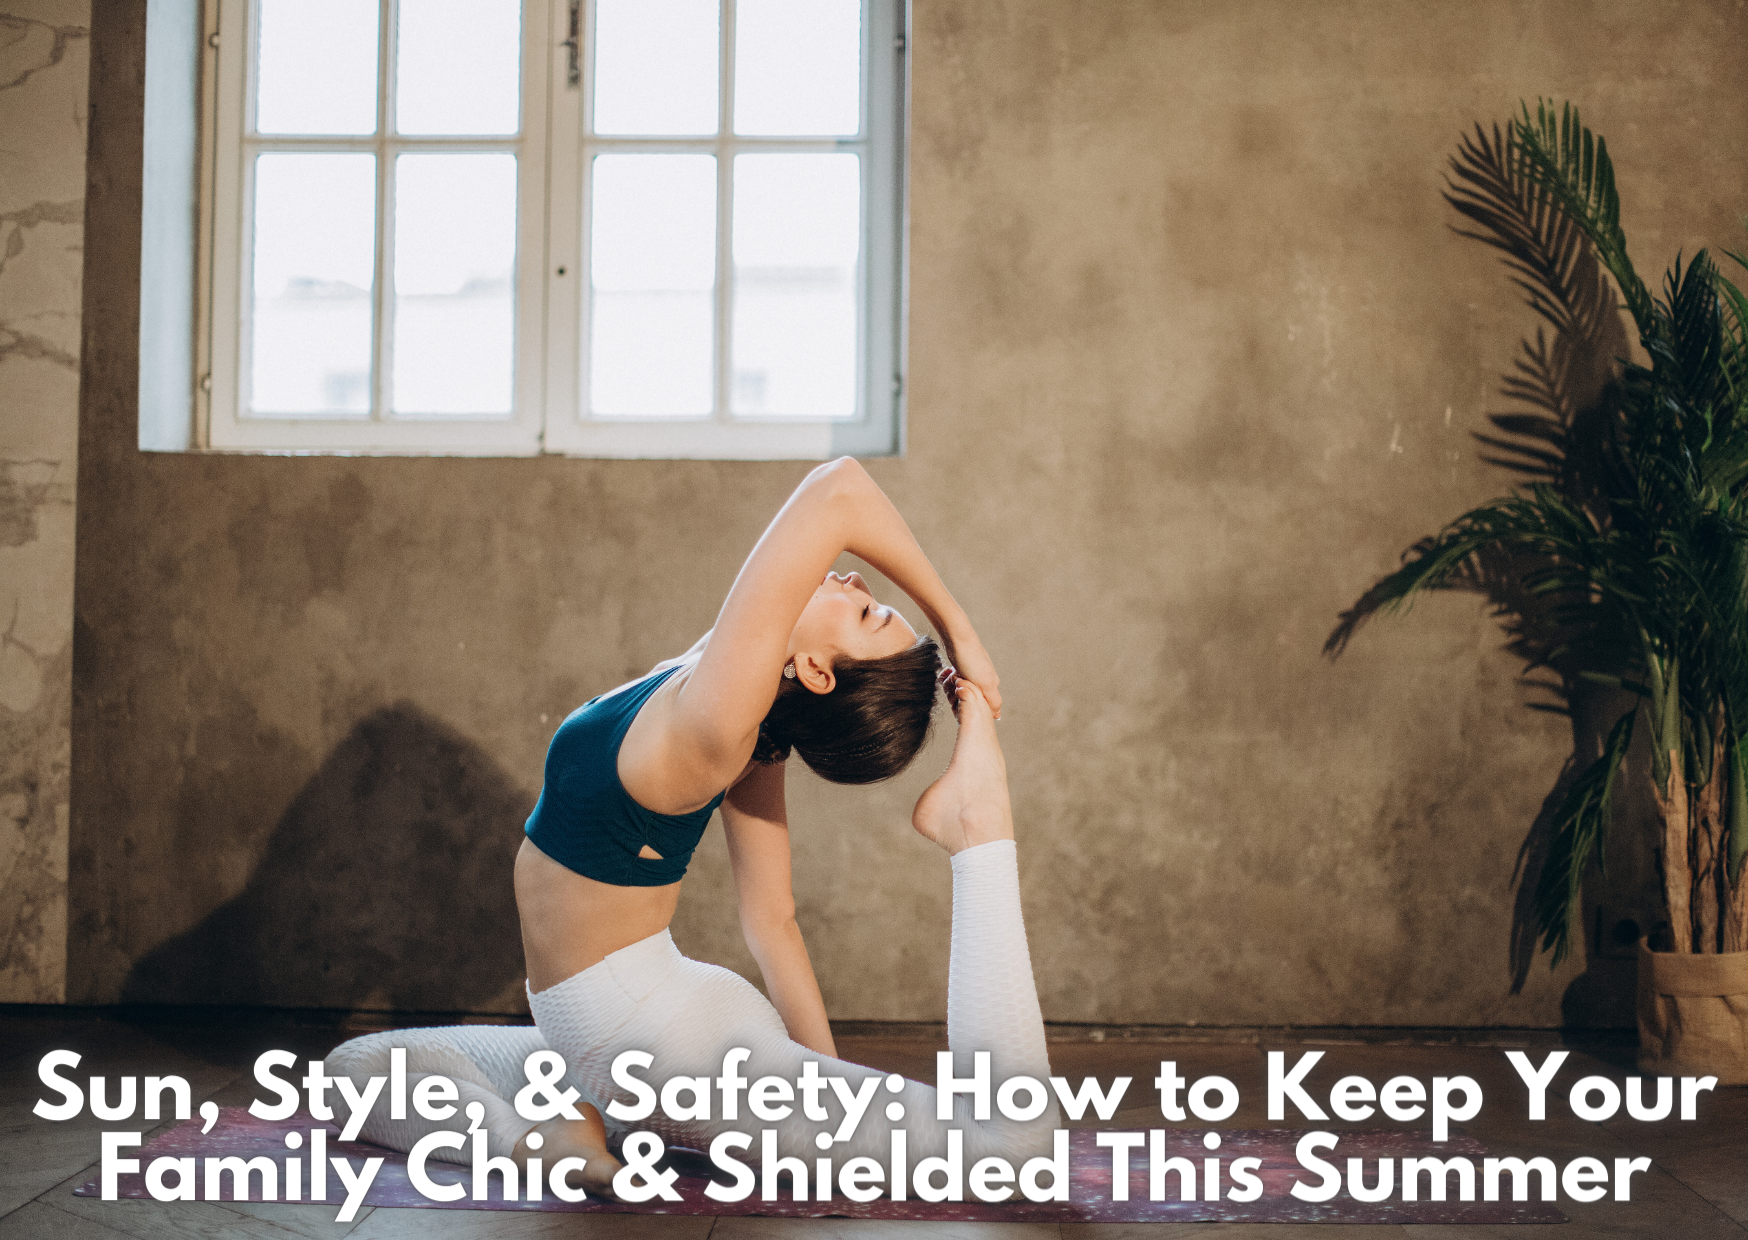 Sun, Style, & Safety: How to Keep Your Family Chic & Shielded This Summer